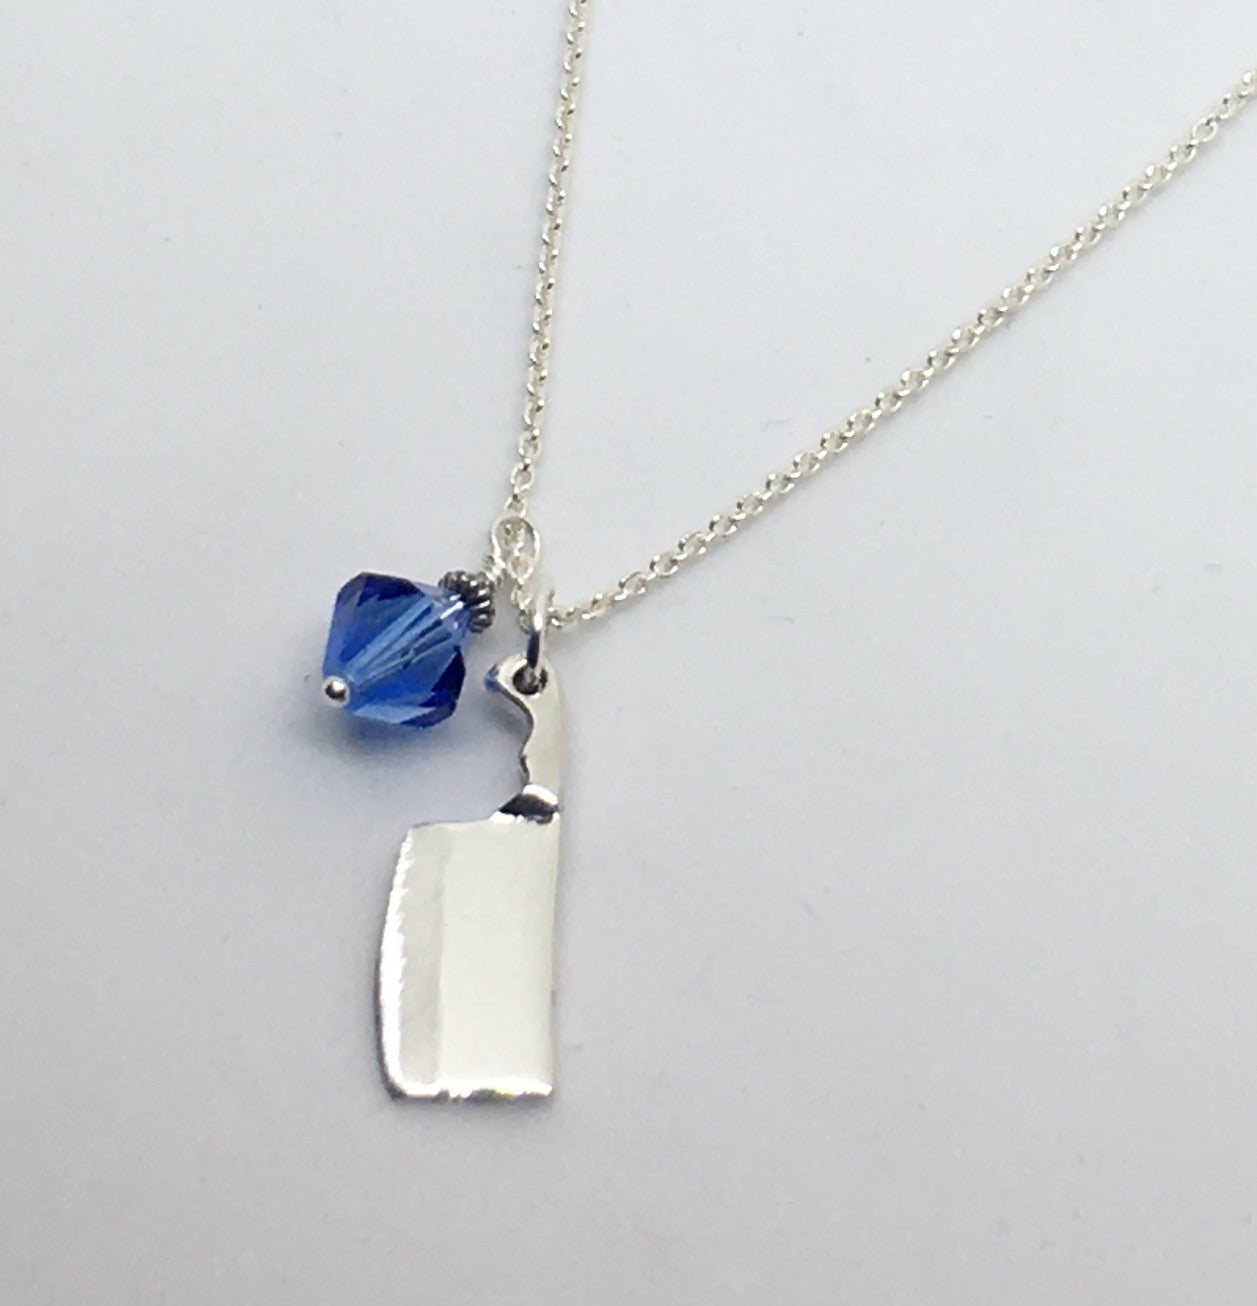 Chef's Cleaver Pendant Necklace with Blue Swarovski Crystal Charm